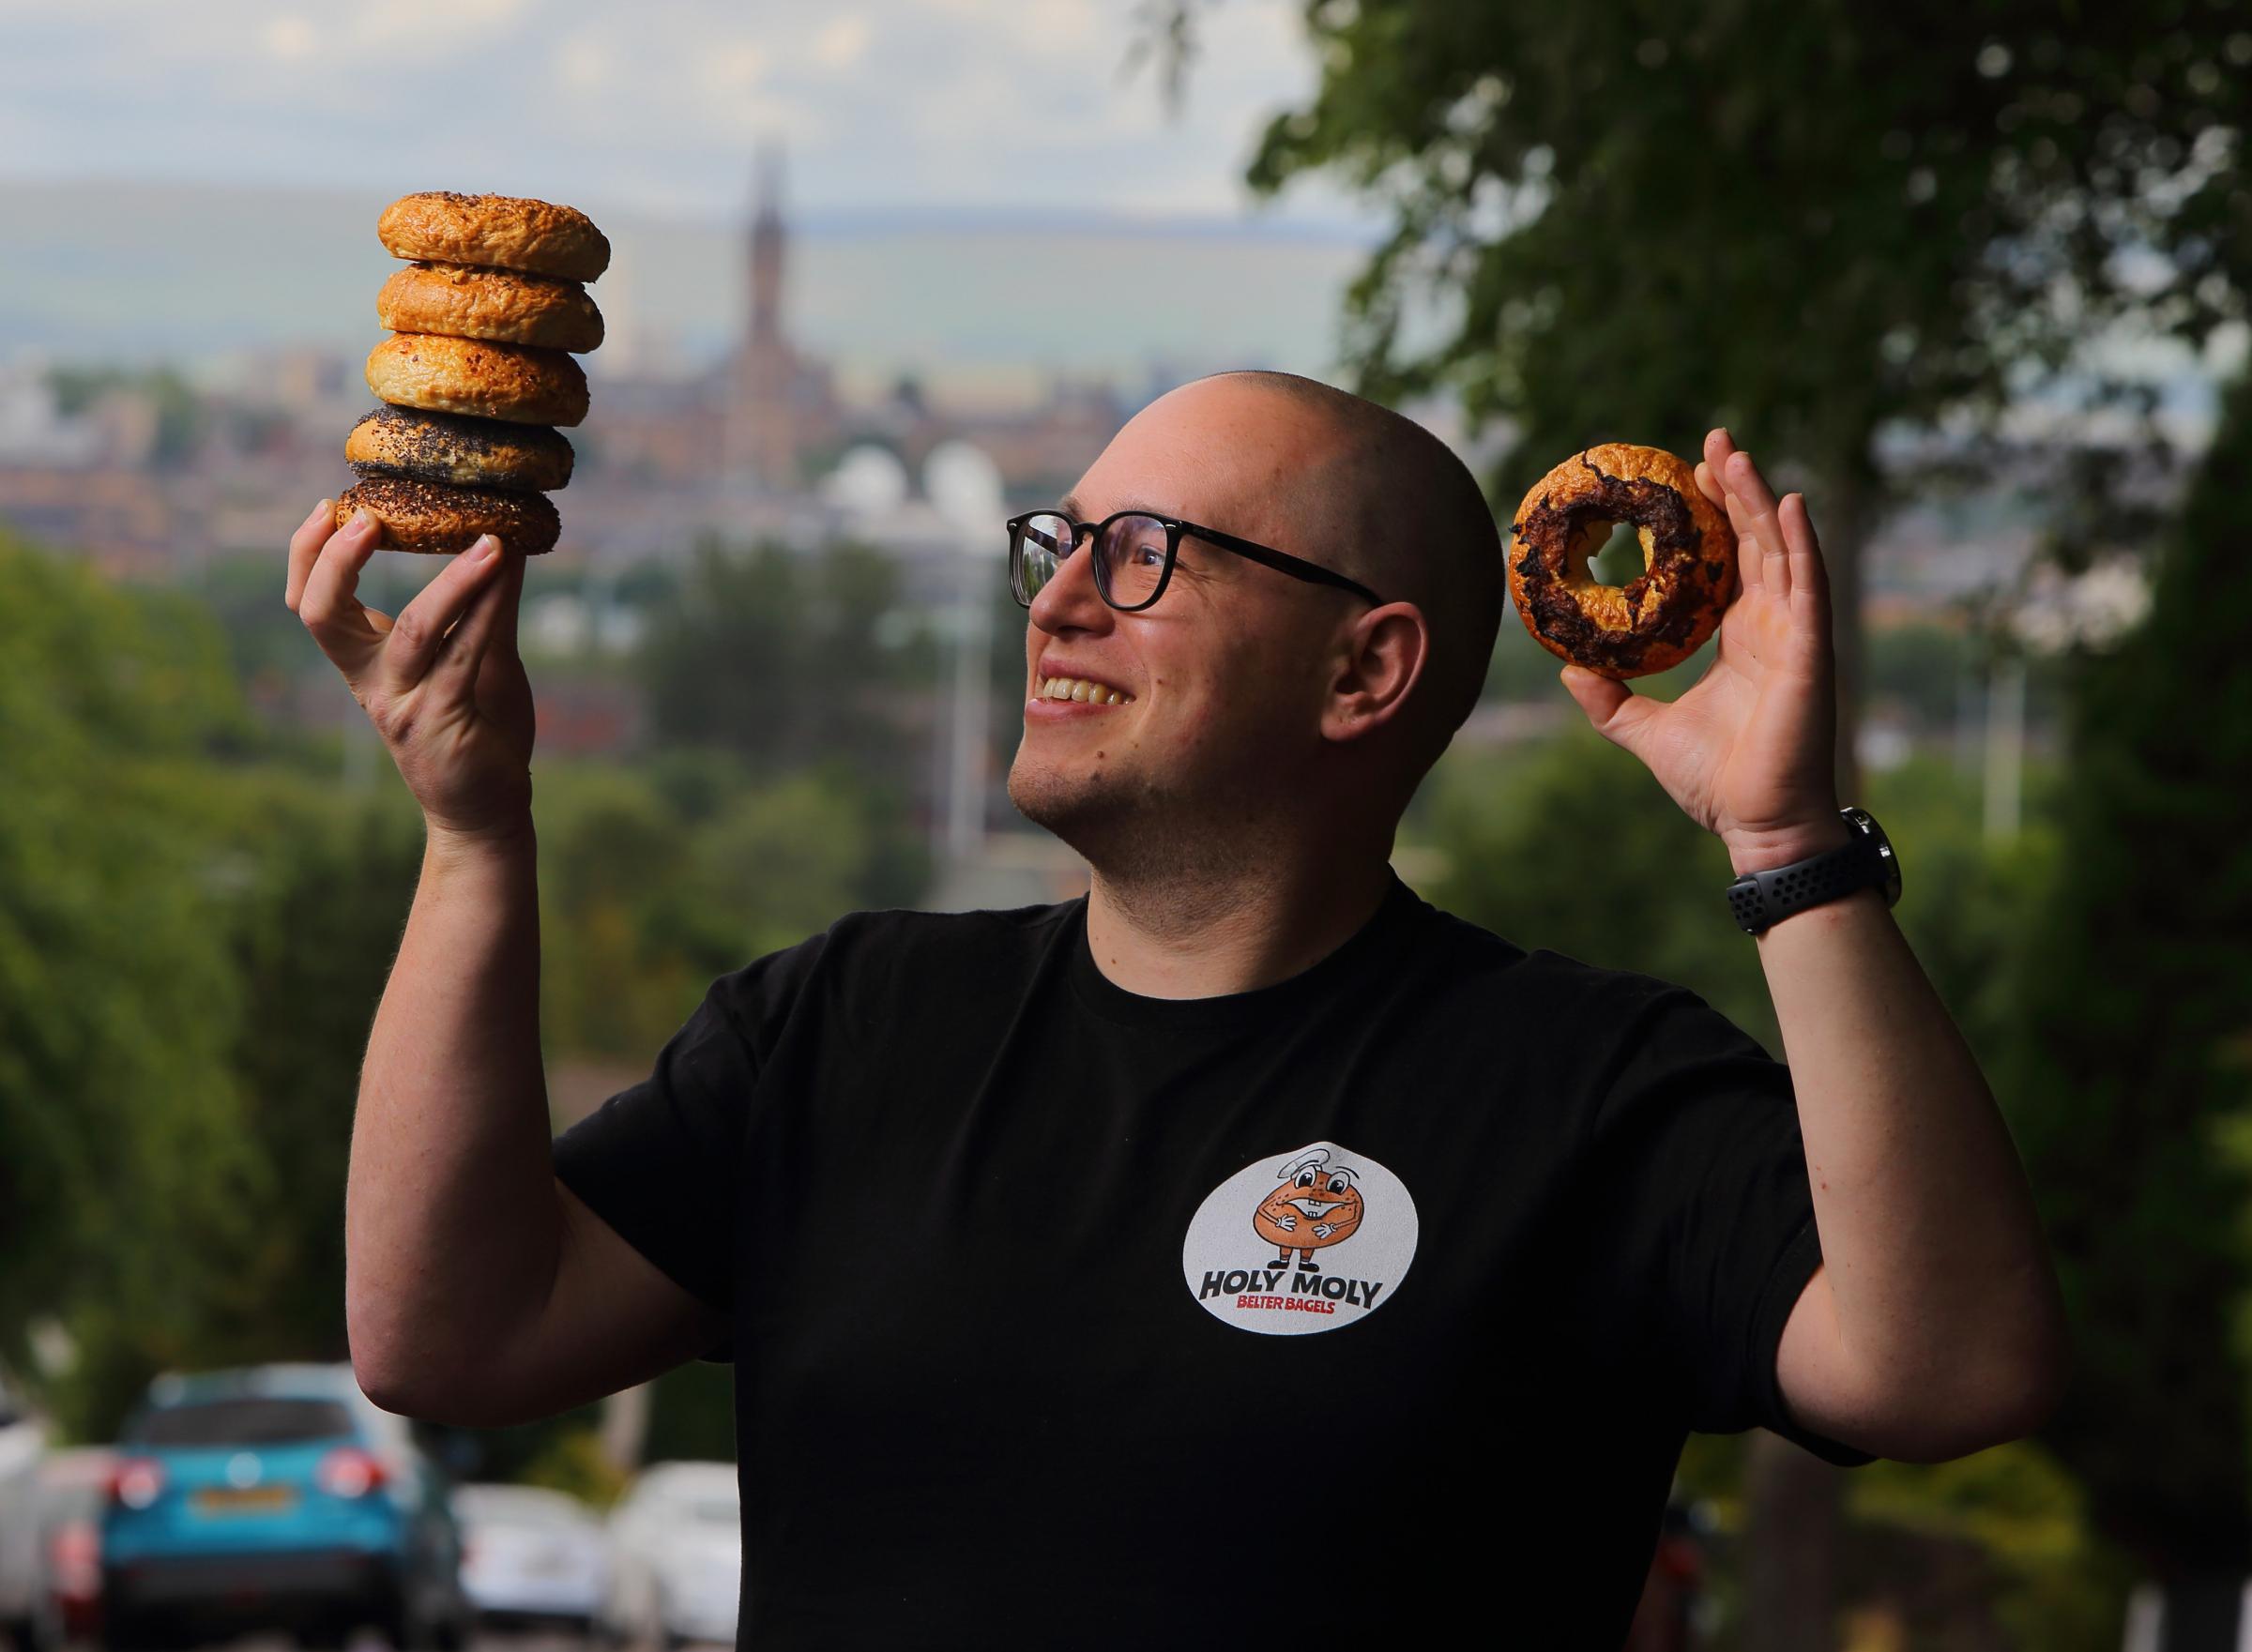 Glasgow's Holy Moly Bagels has taken Instagram by storm